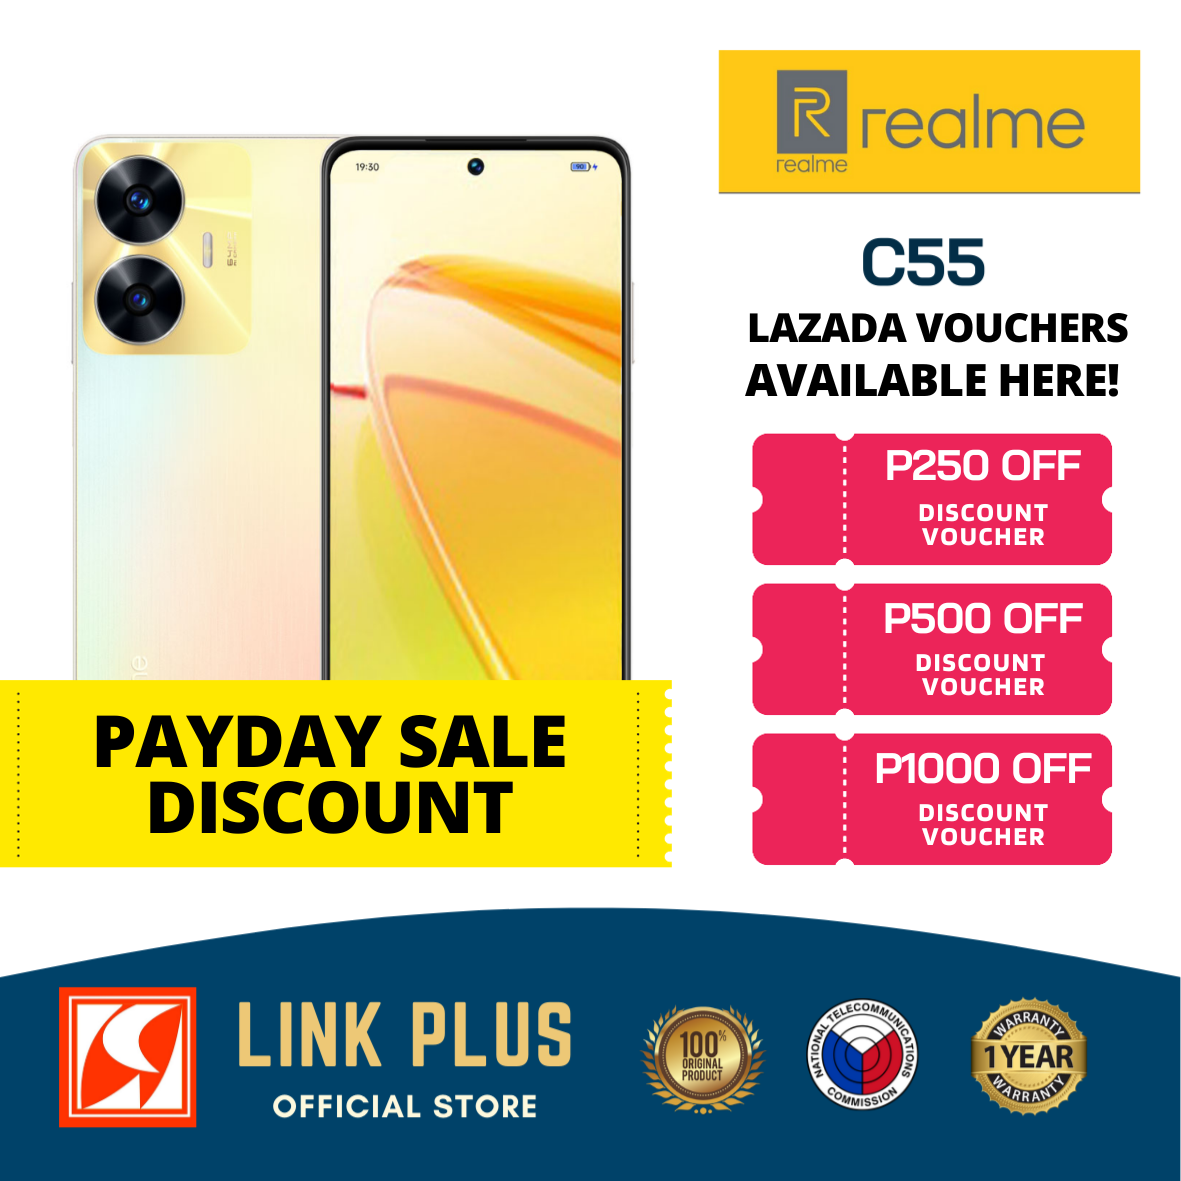 Check out realme C55 (8+8GB RAM, 256GB ROM) Get it on Shopee now! GET